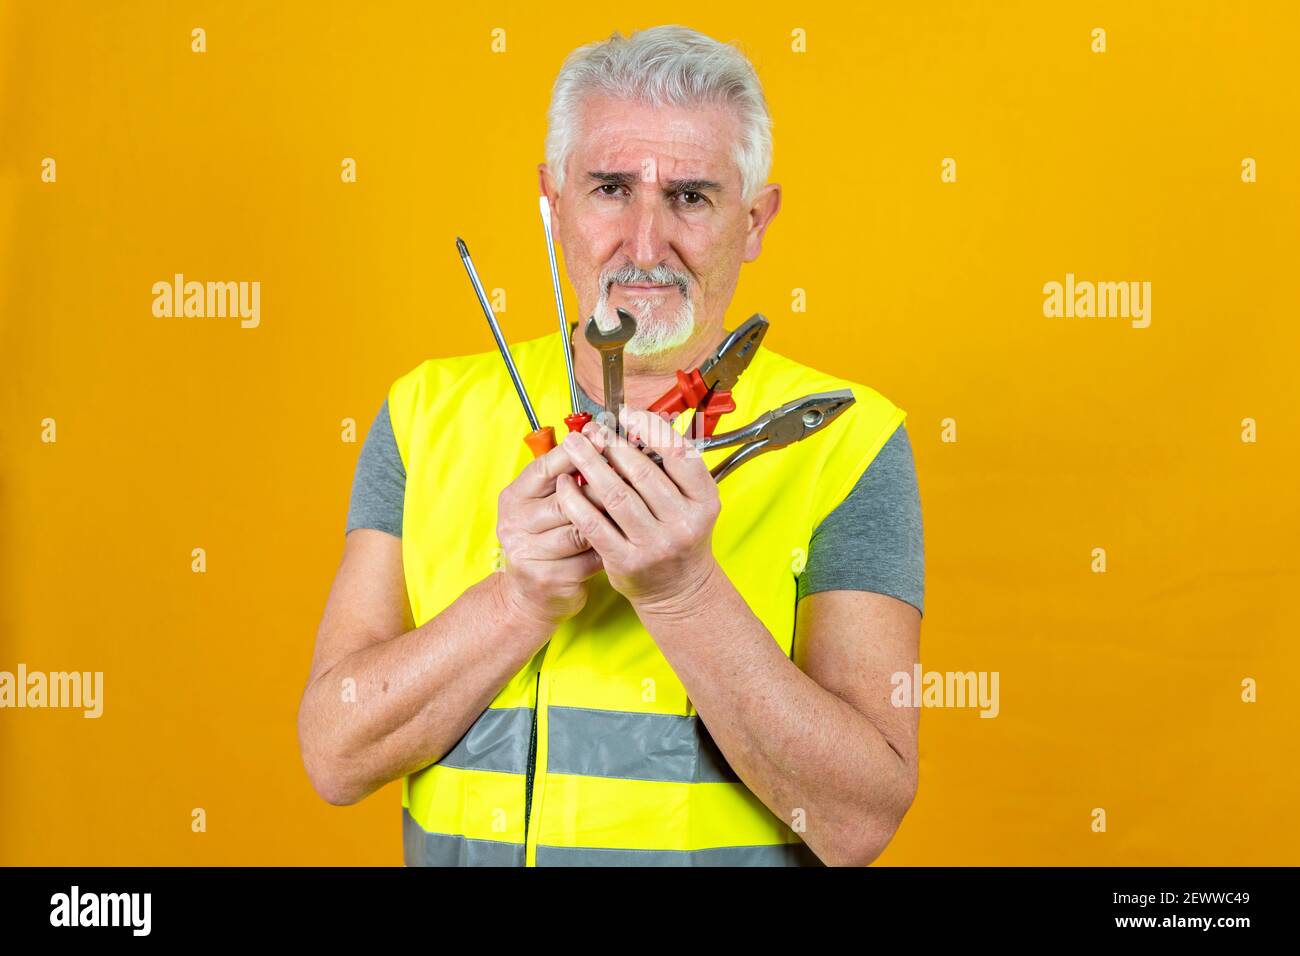 portrait of a mature worker wearing reflector vest showing tools isolated on yellow background Stock Photo